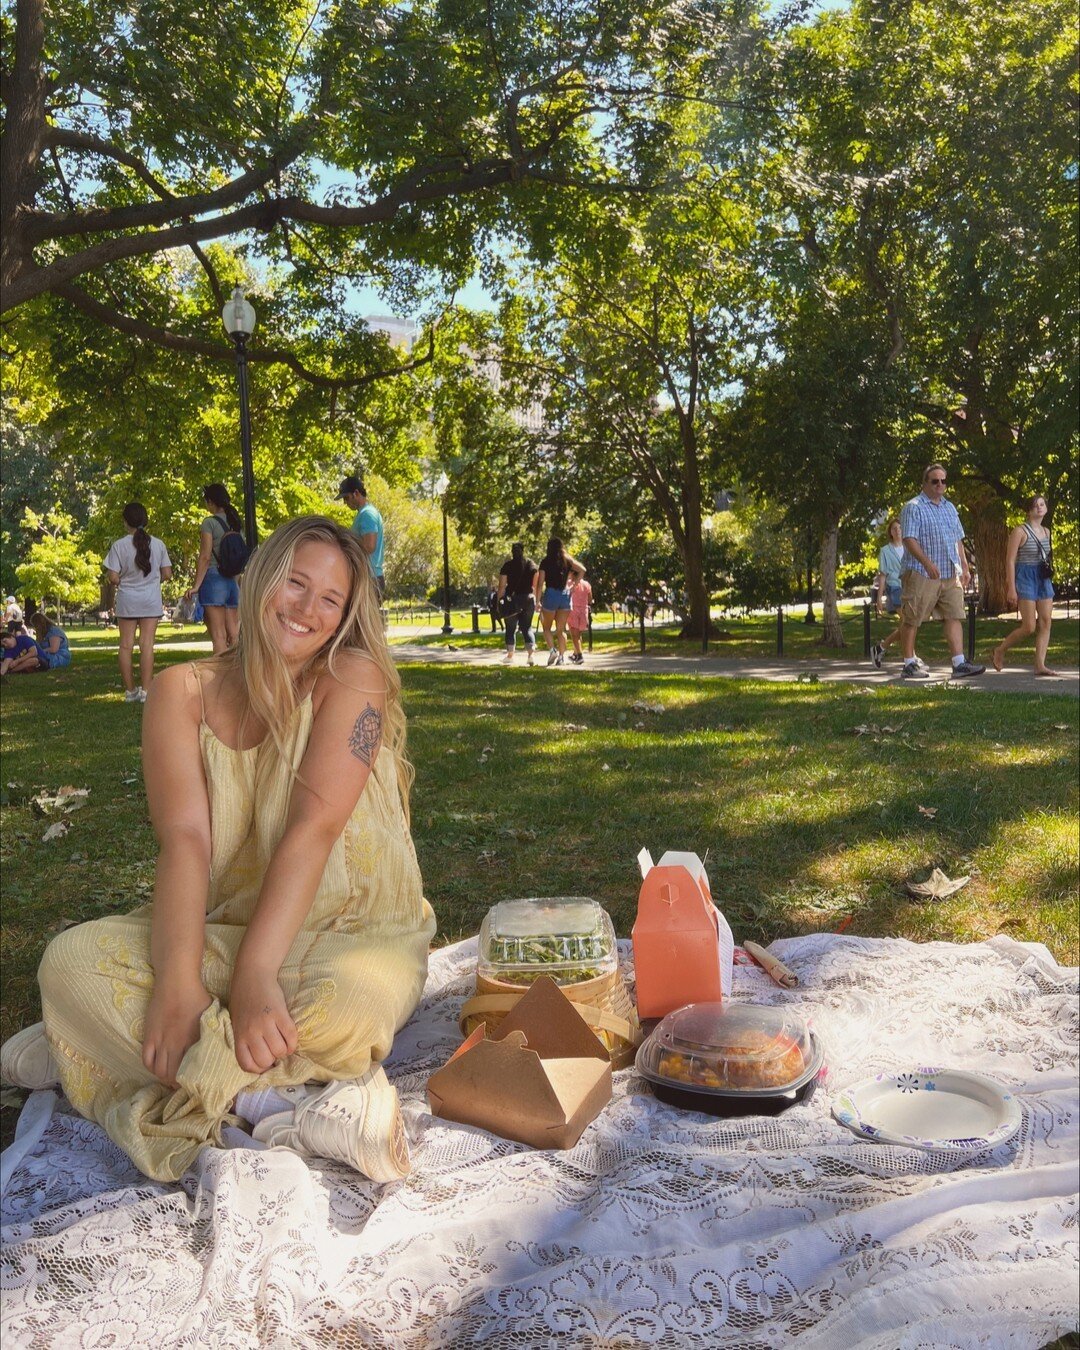 A picnic in the park?? Yes please!!​​​​​​​​
​​​​​​​​
And what pairs perfectly with a picnic? (Besides a perfectly sunny day)  A scavenger hunt. ​​​​​​​​
​​​​​​​​
So happy to have found @amazingco.me because I got to spend the day running around Back 